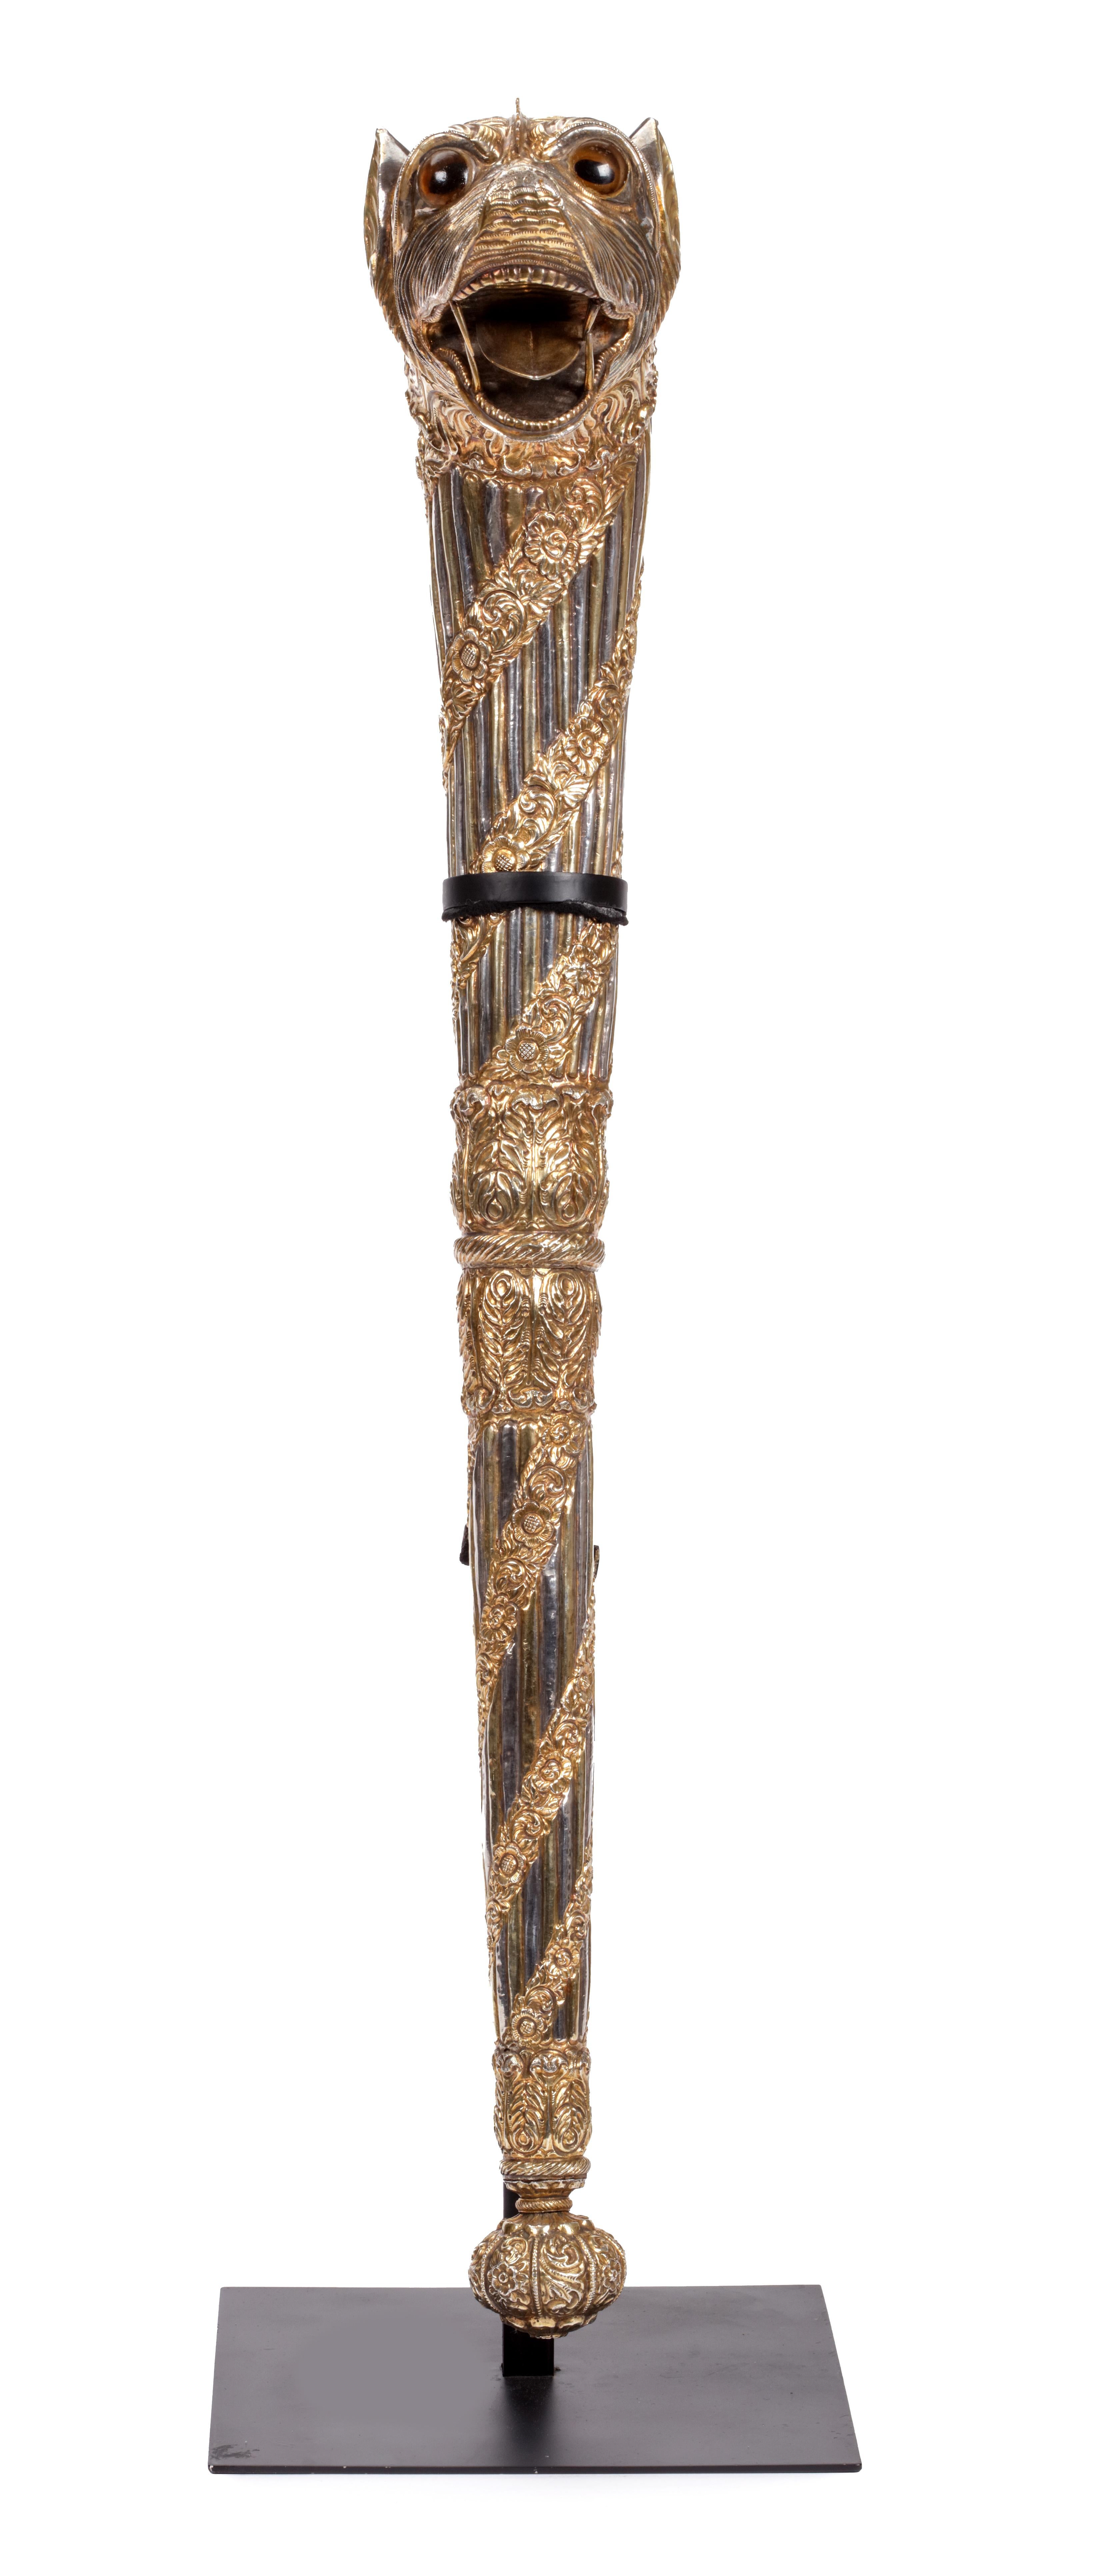 Gilt An Indian part-gilt silver-clad ceremonial sceptre or mace with a tiger’s head For Sale